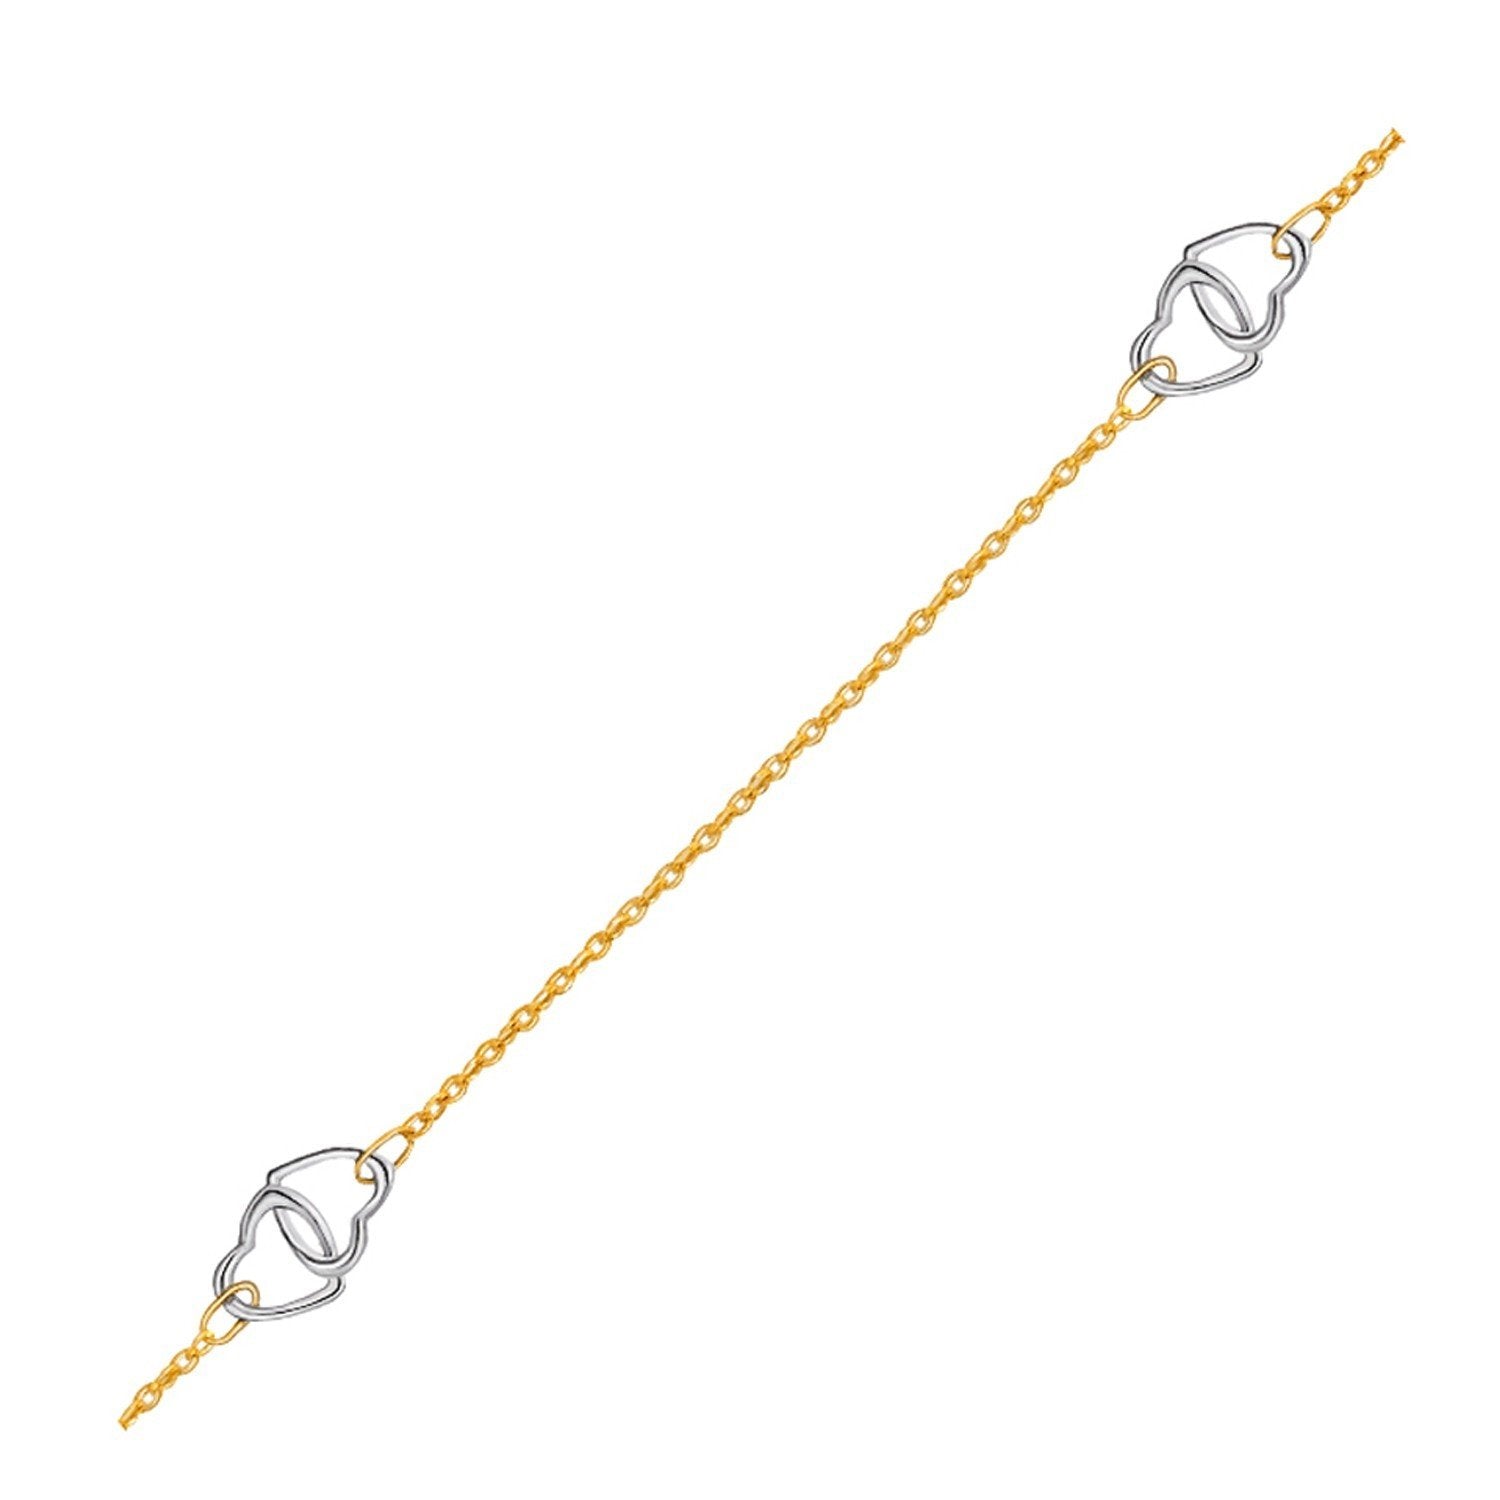 14k Two Tone Gold Entwined Heart Stationed Anklet, size 10''